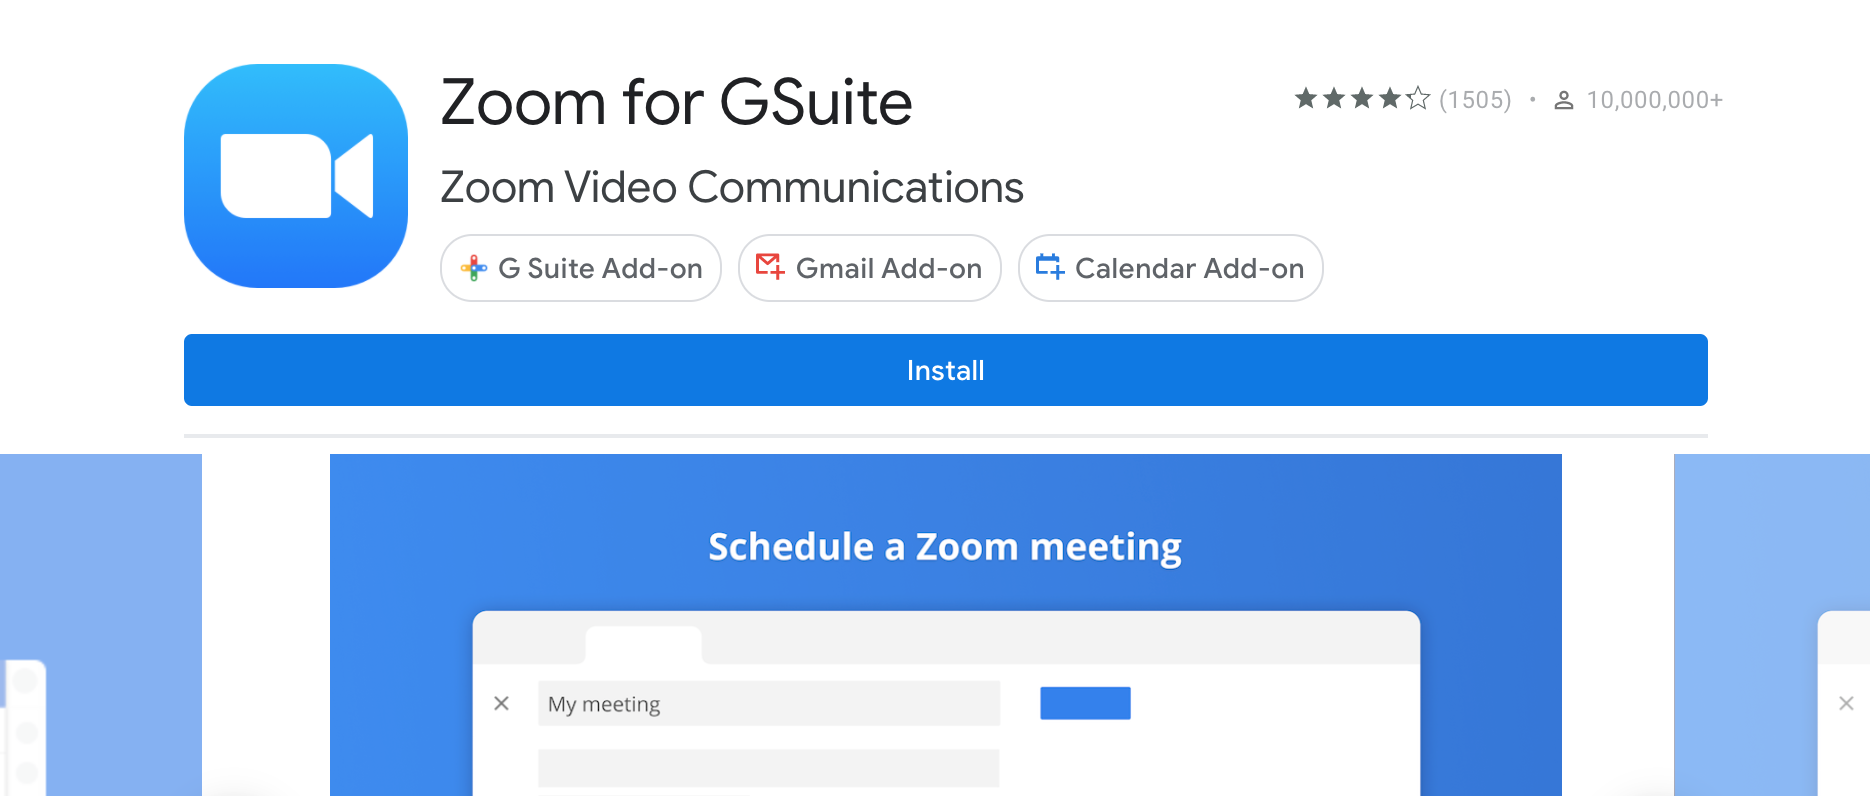 zoom for g suite download